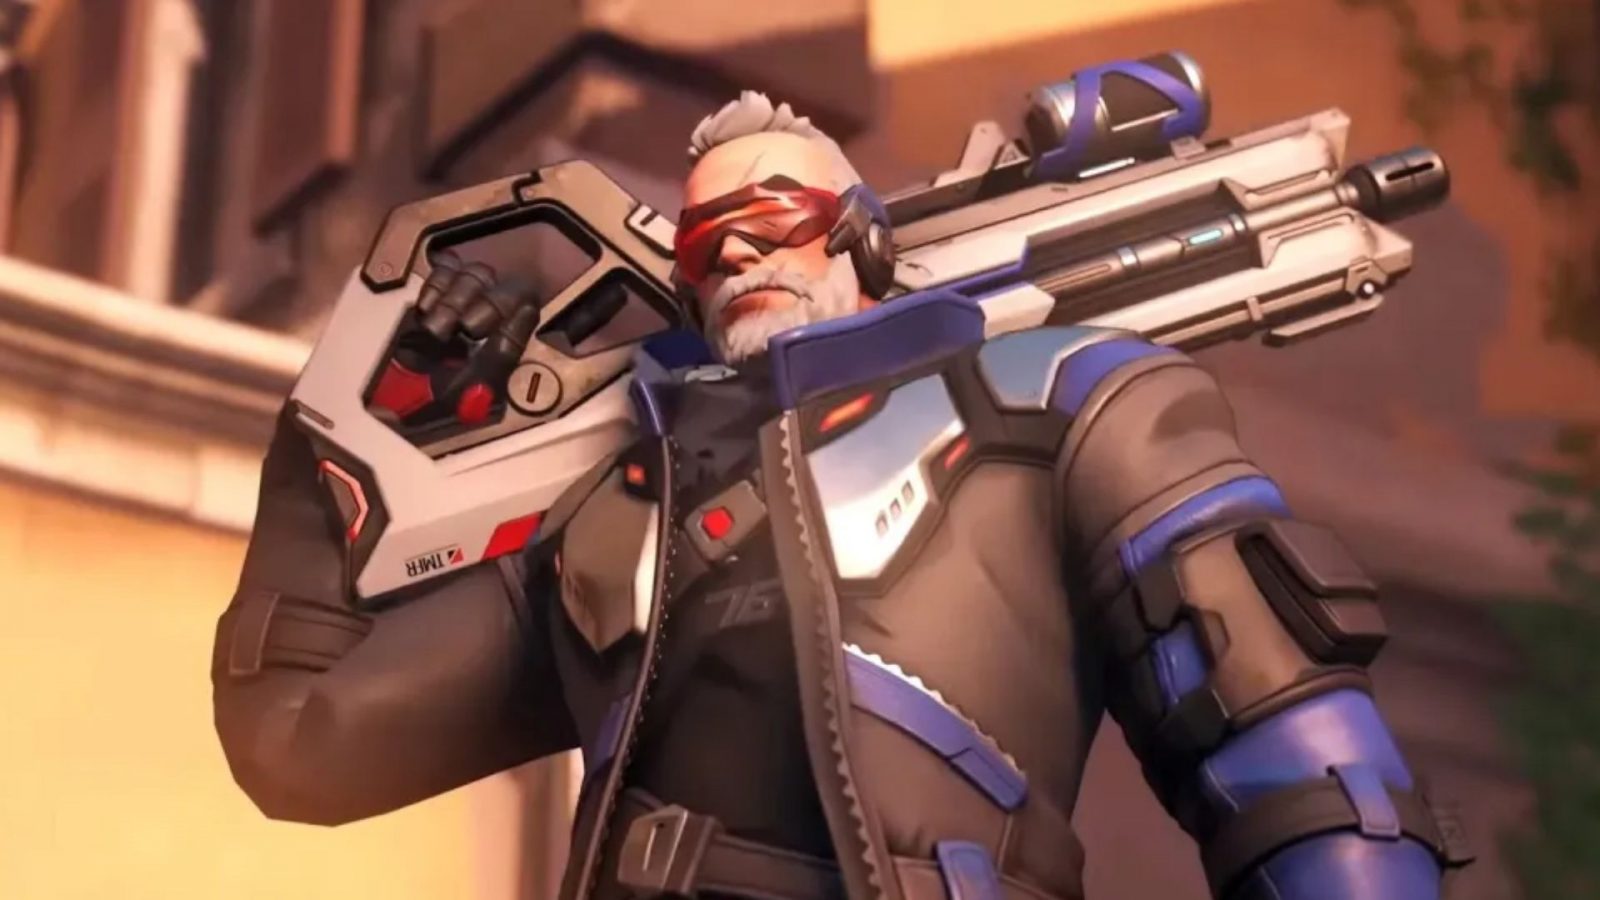 soldier 76 holding weapon in overwatch 2